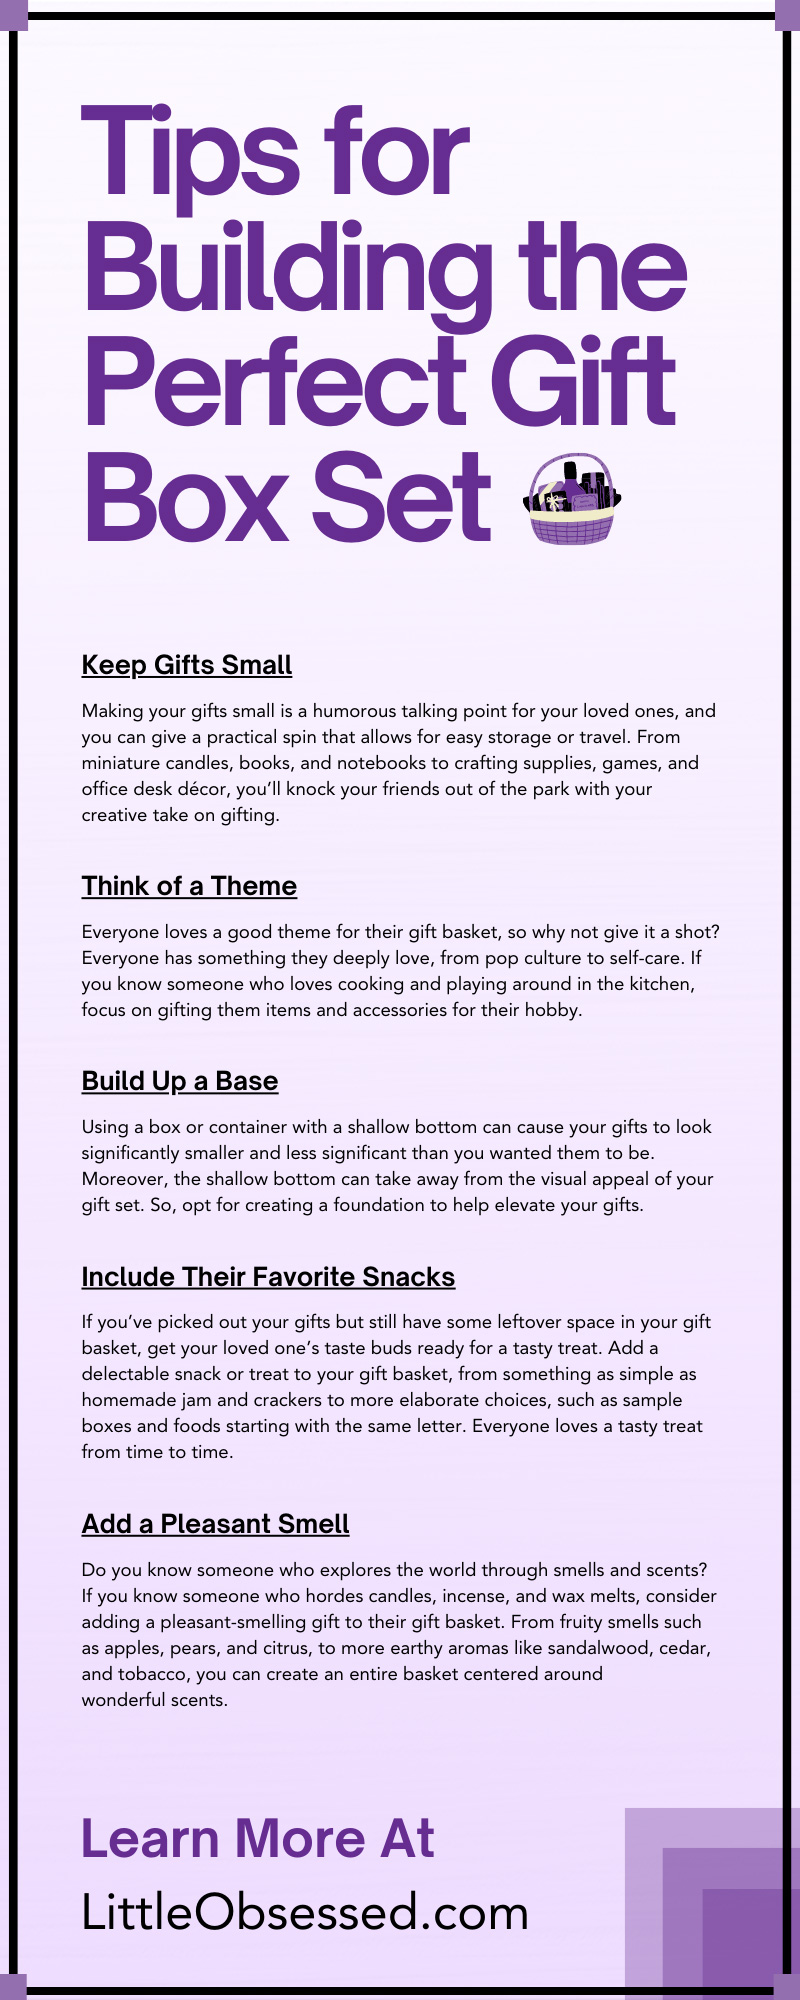 8 Tips for Building the Perfect Gift Box Set